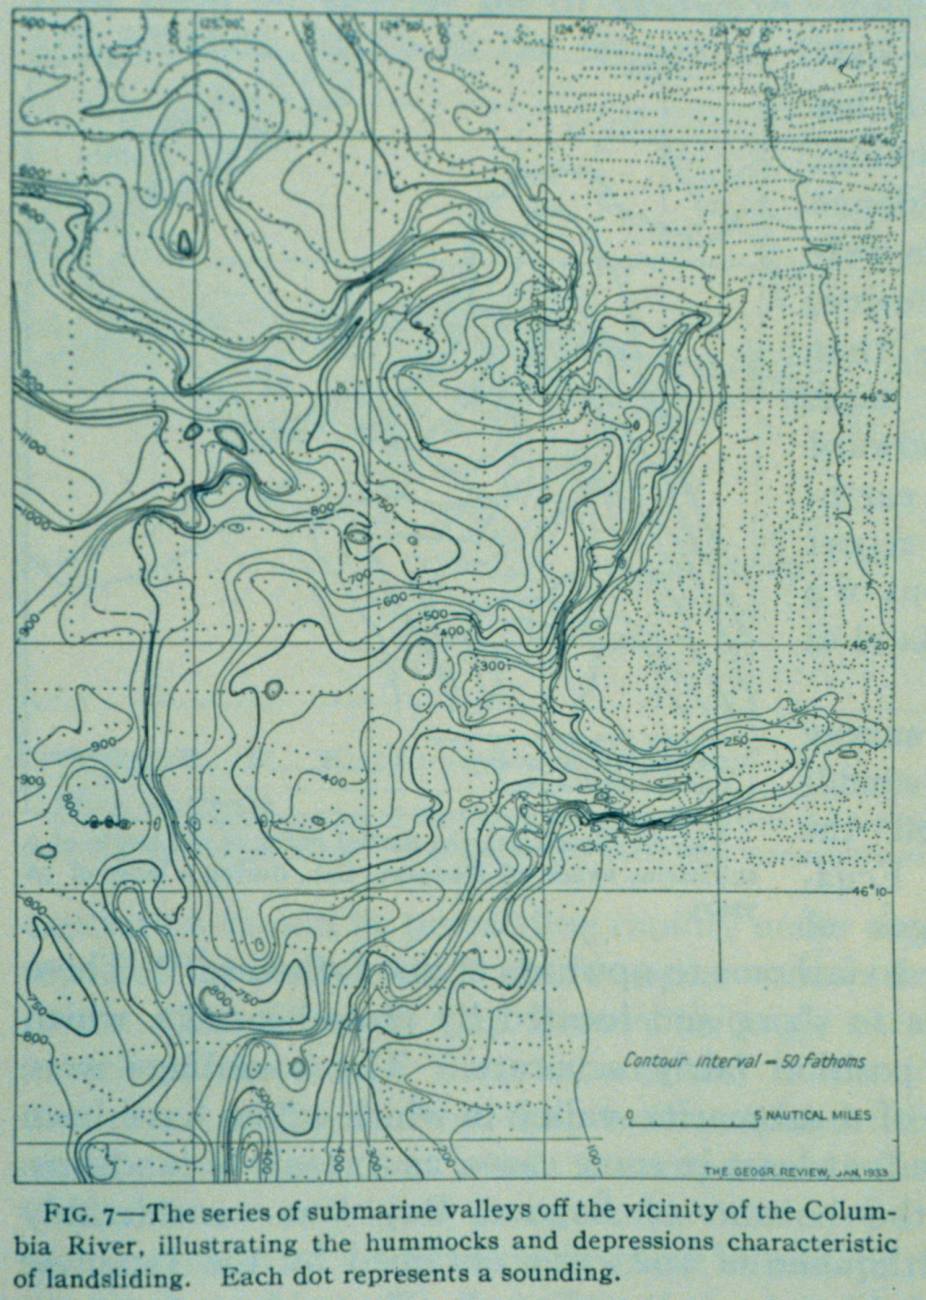 A first contoured map of the Astoria Canyon complex off the entrance to theColumbia River